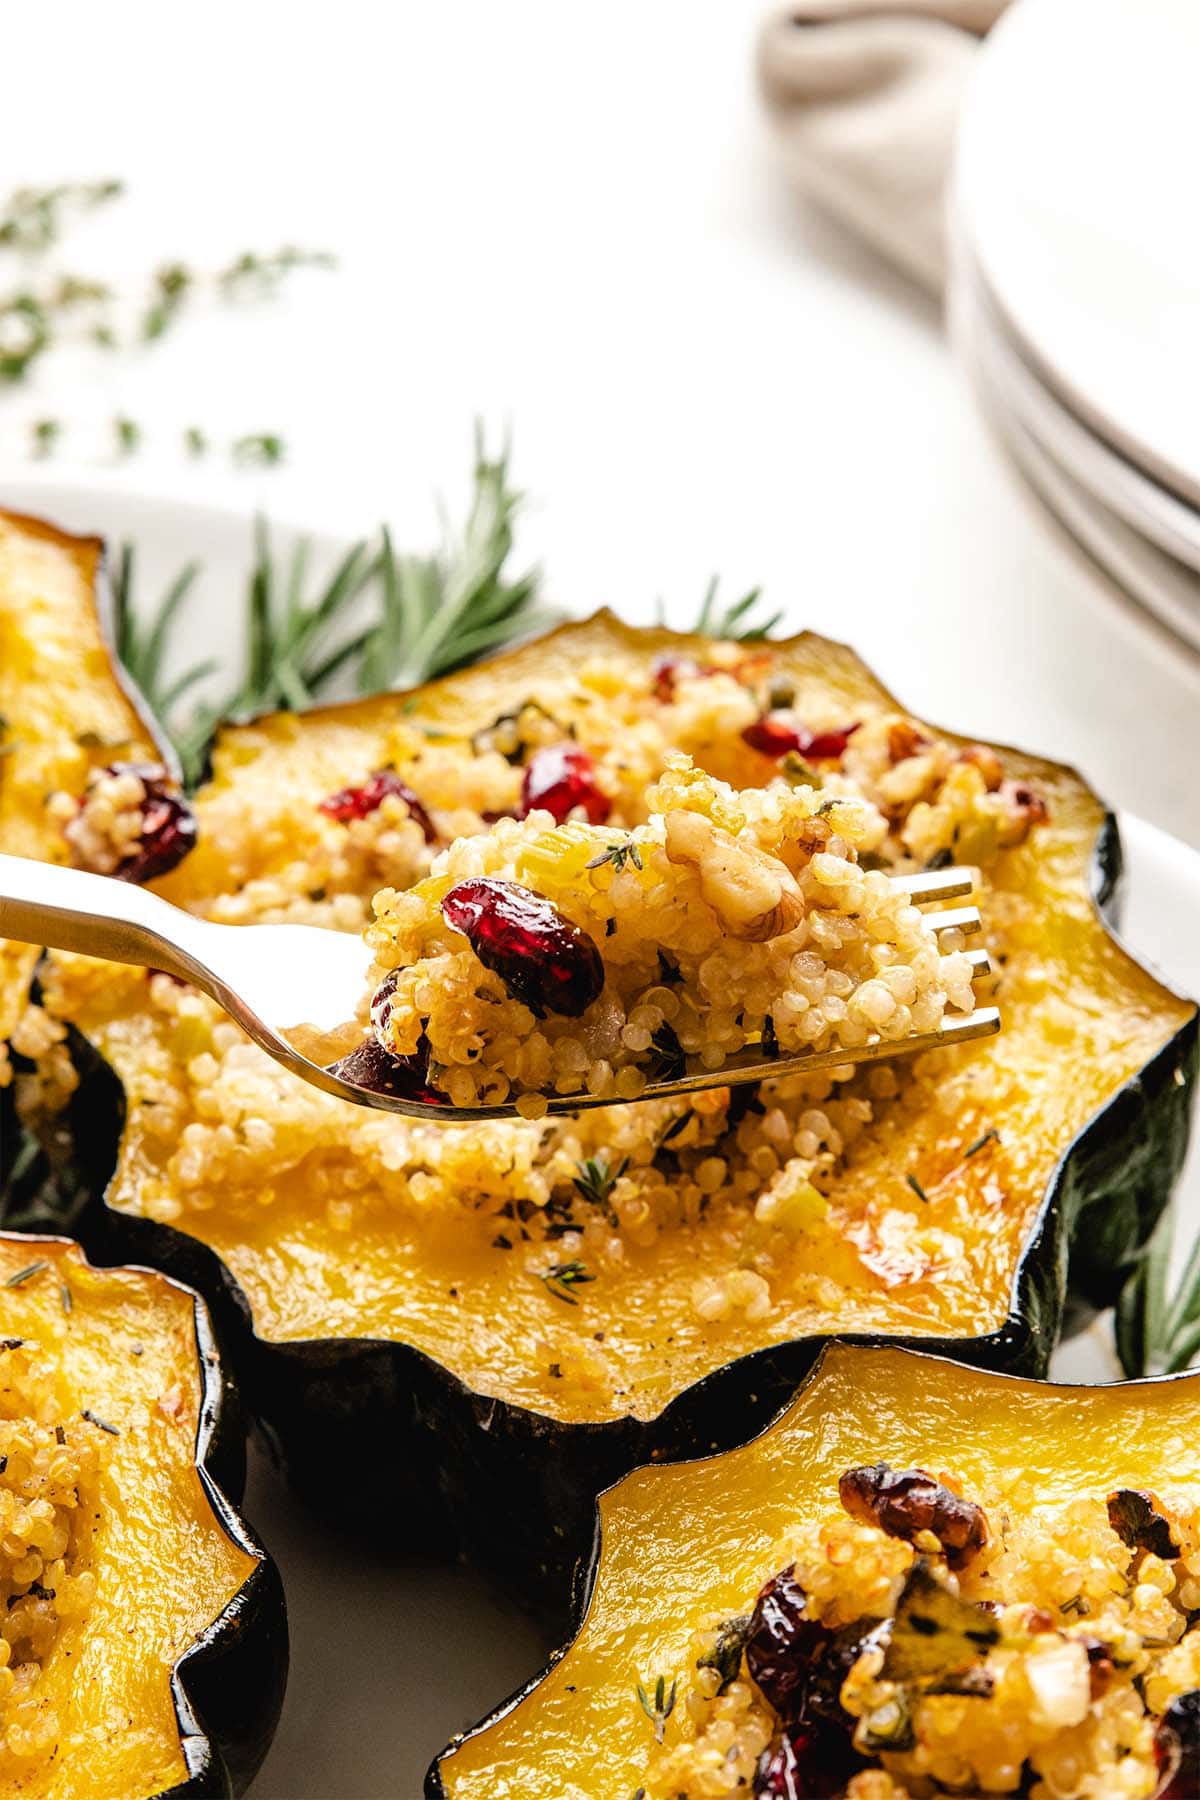 A forkful of herbed quinoa stuffing being taken from a stuffed acorn squash half.